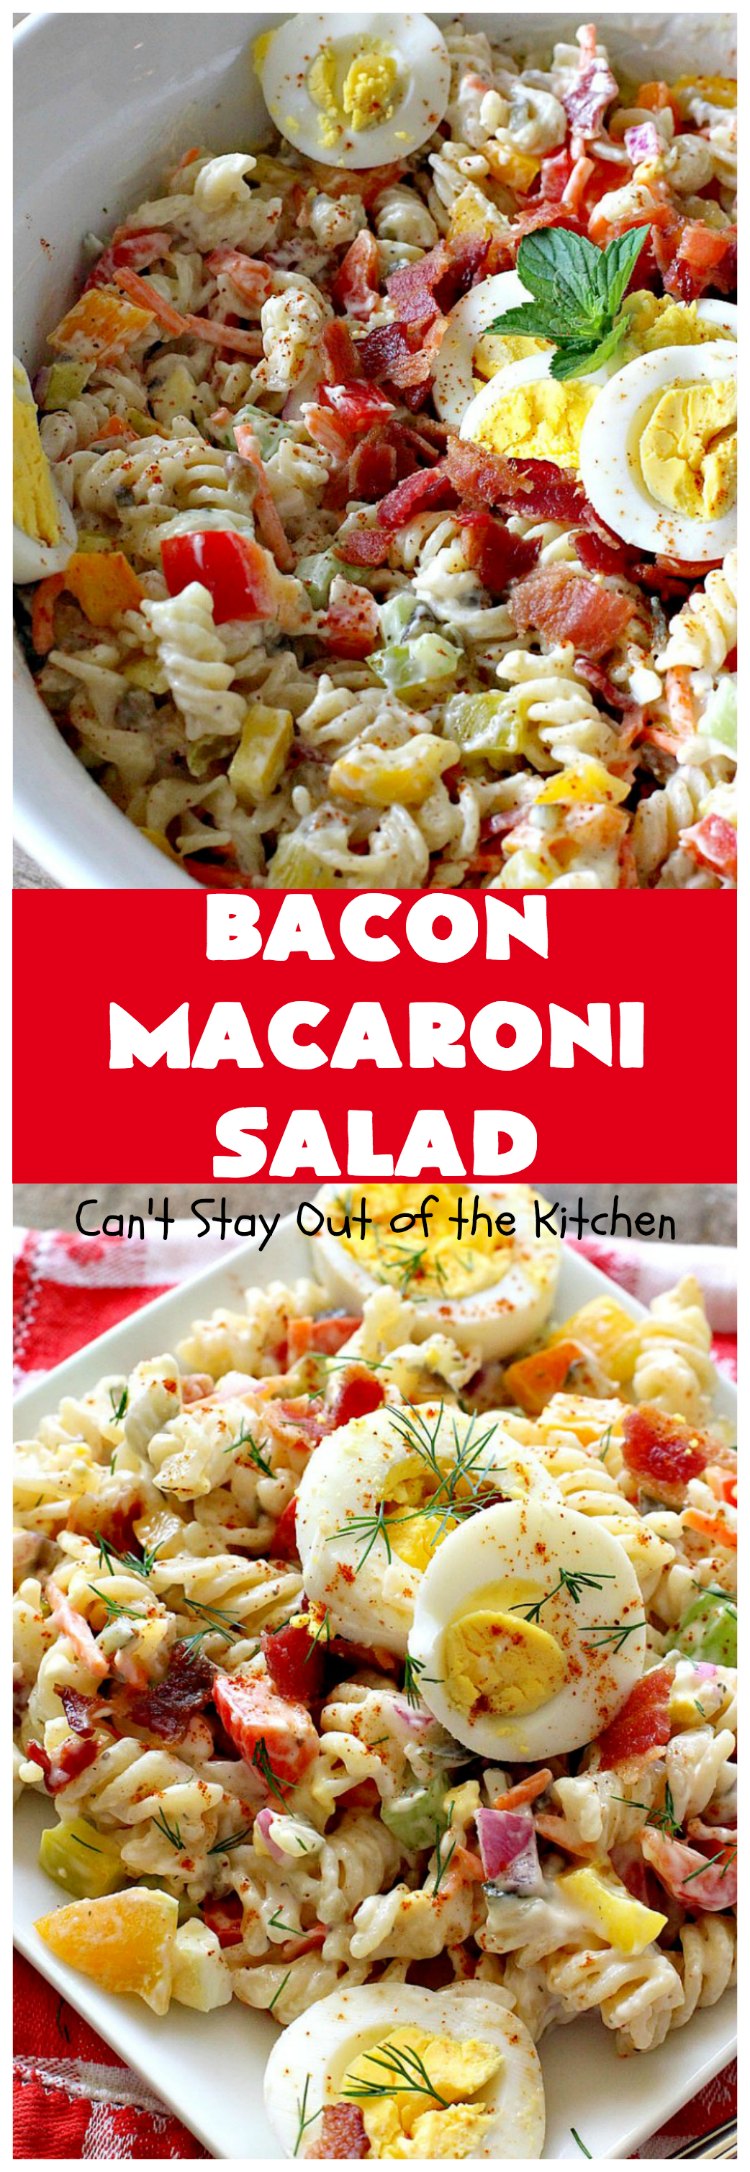 Bacon Macaroni Salad | Can't Stay Out of the Kitchen